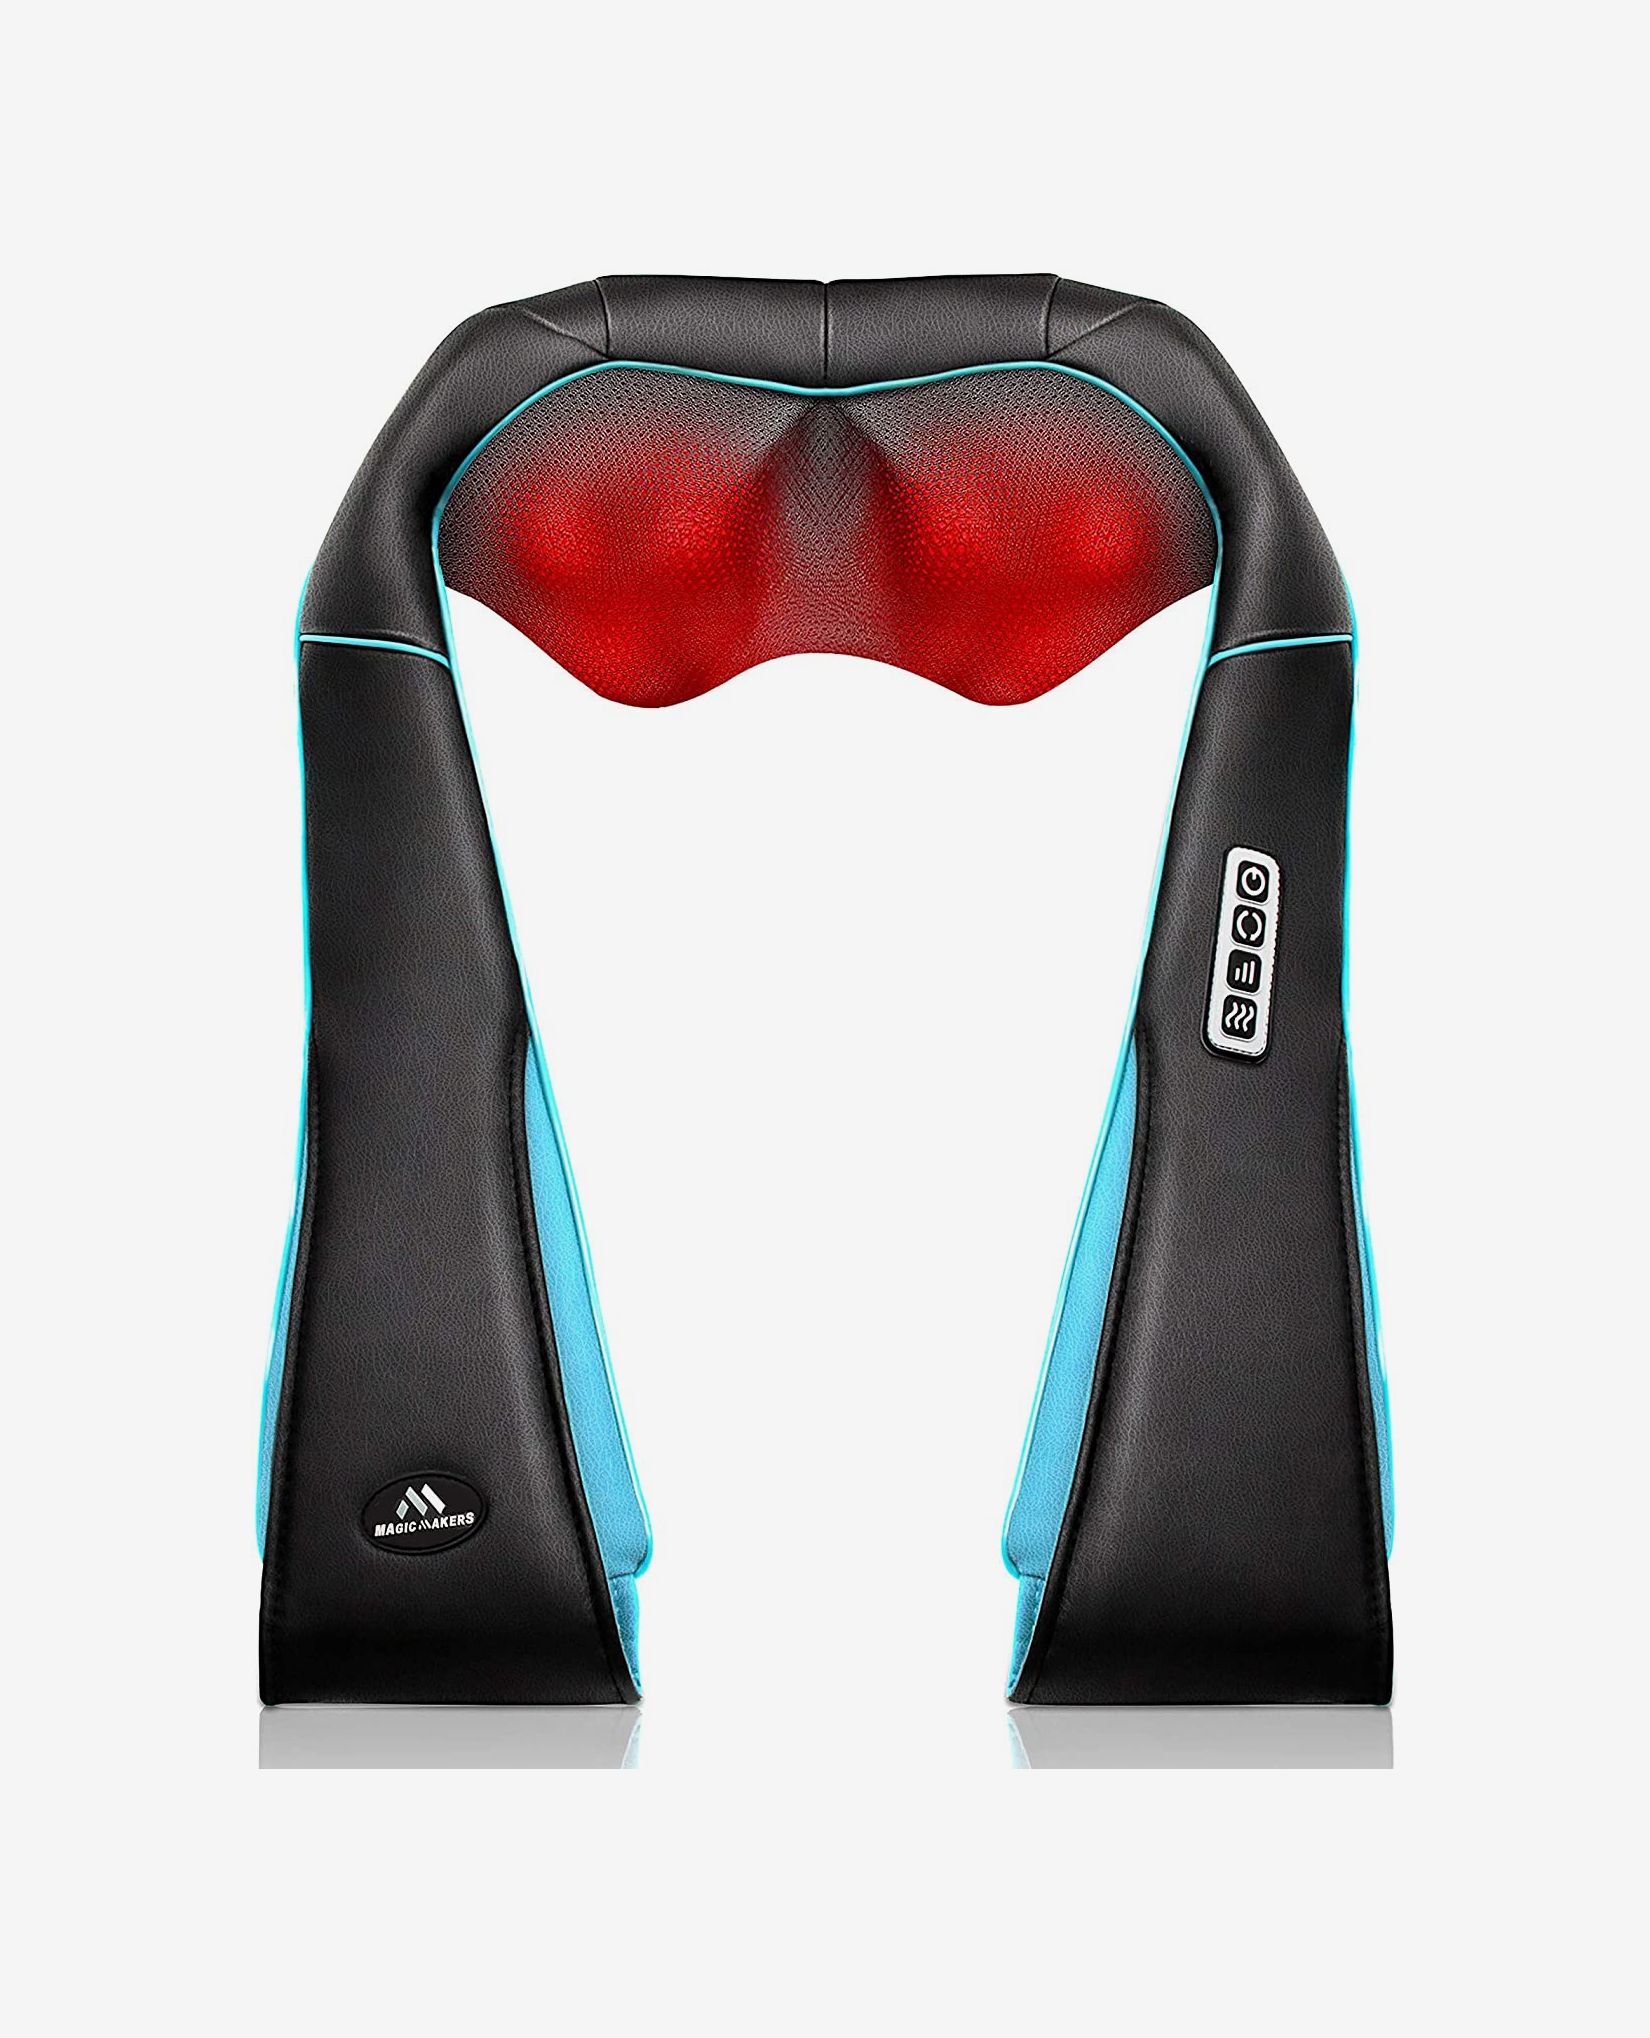  MagicMakers Neck Massager, Back Massager with Heat